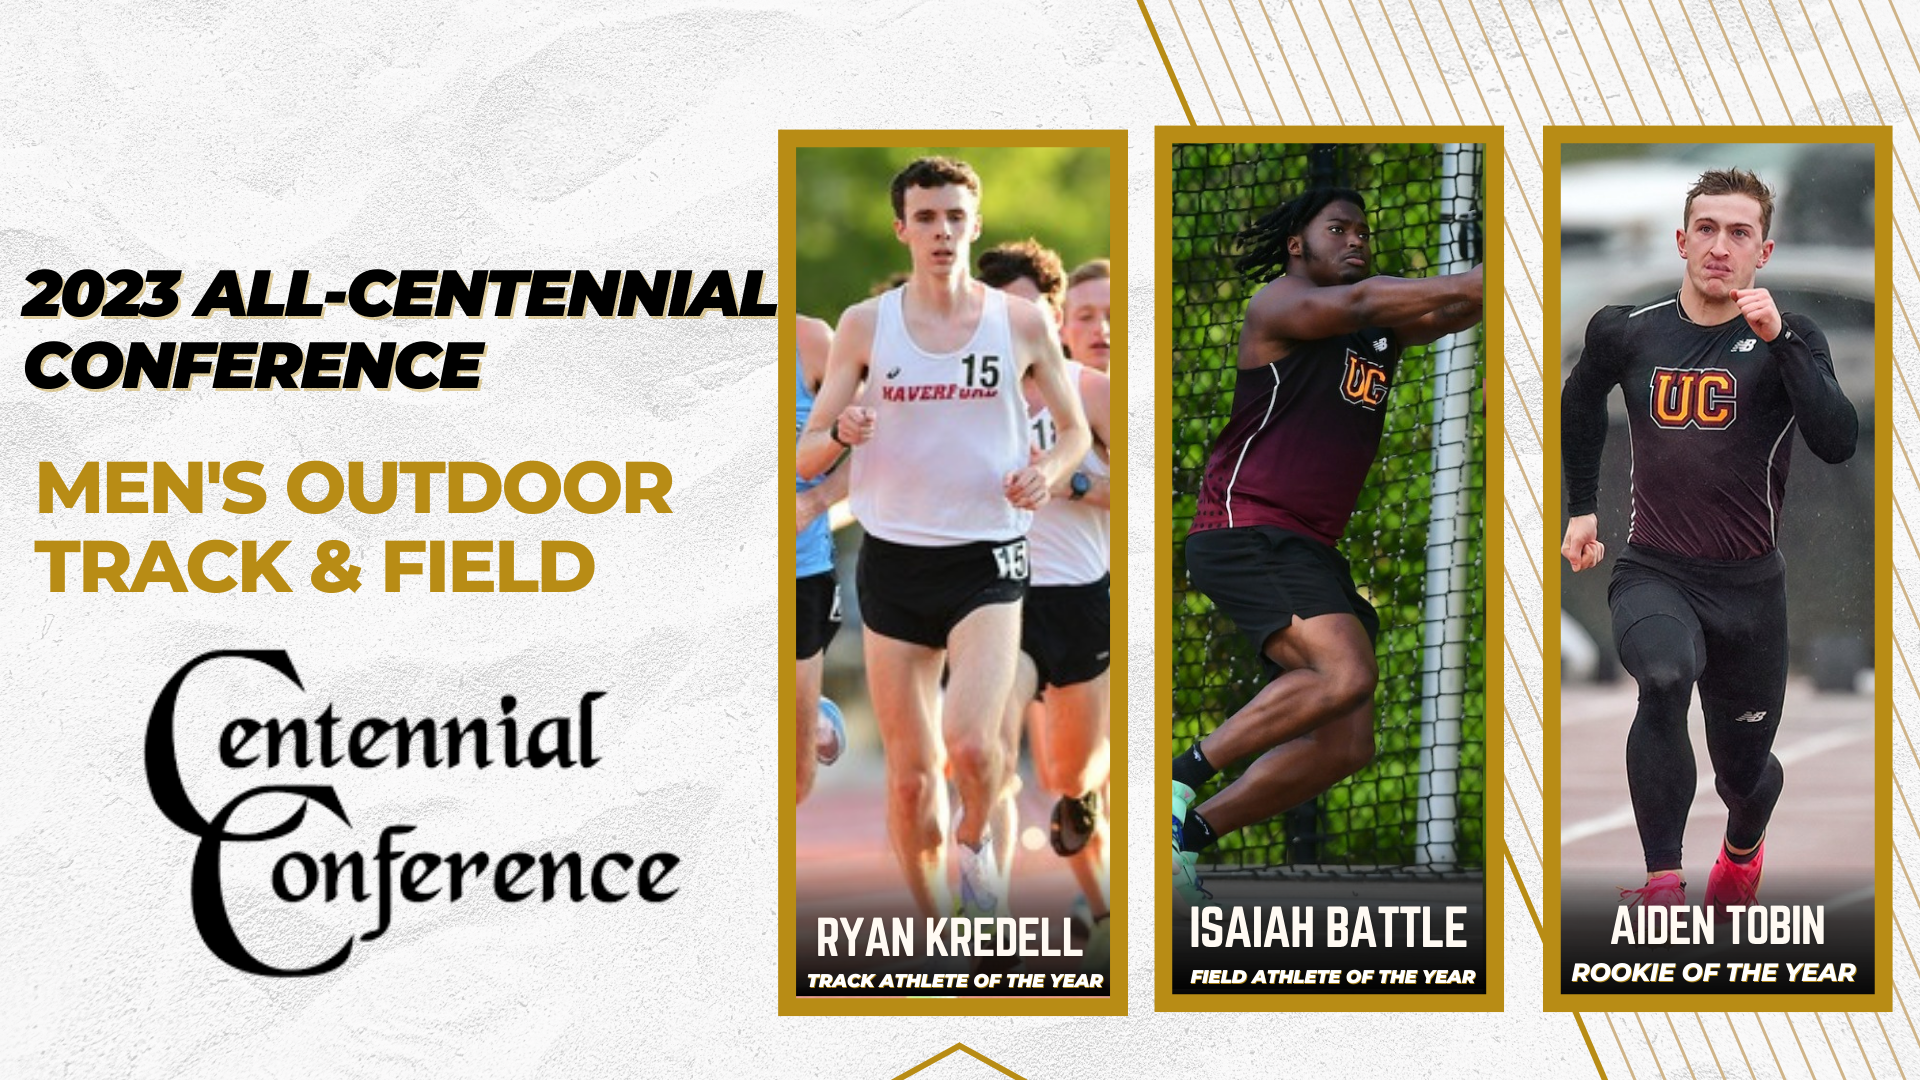 Kredell & Battle Earn Athlete of the Year Awards on All-Centennial Men's Outdoor Track & Field Team